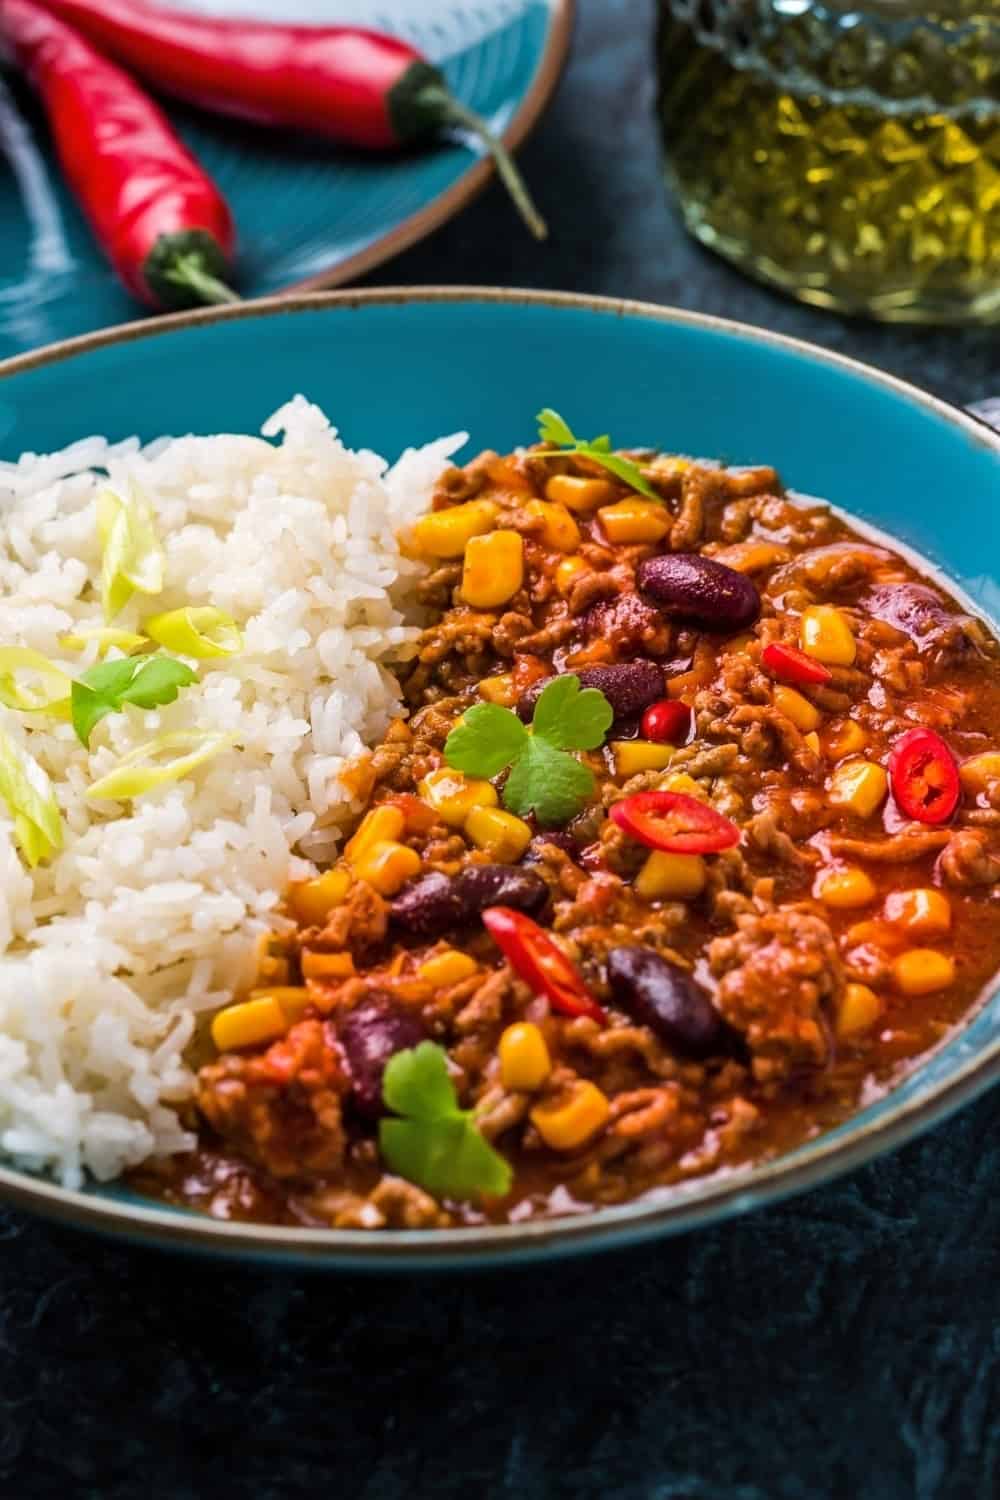 Chili dish served in plate